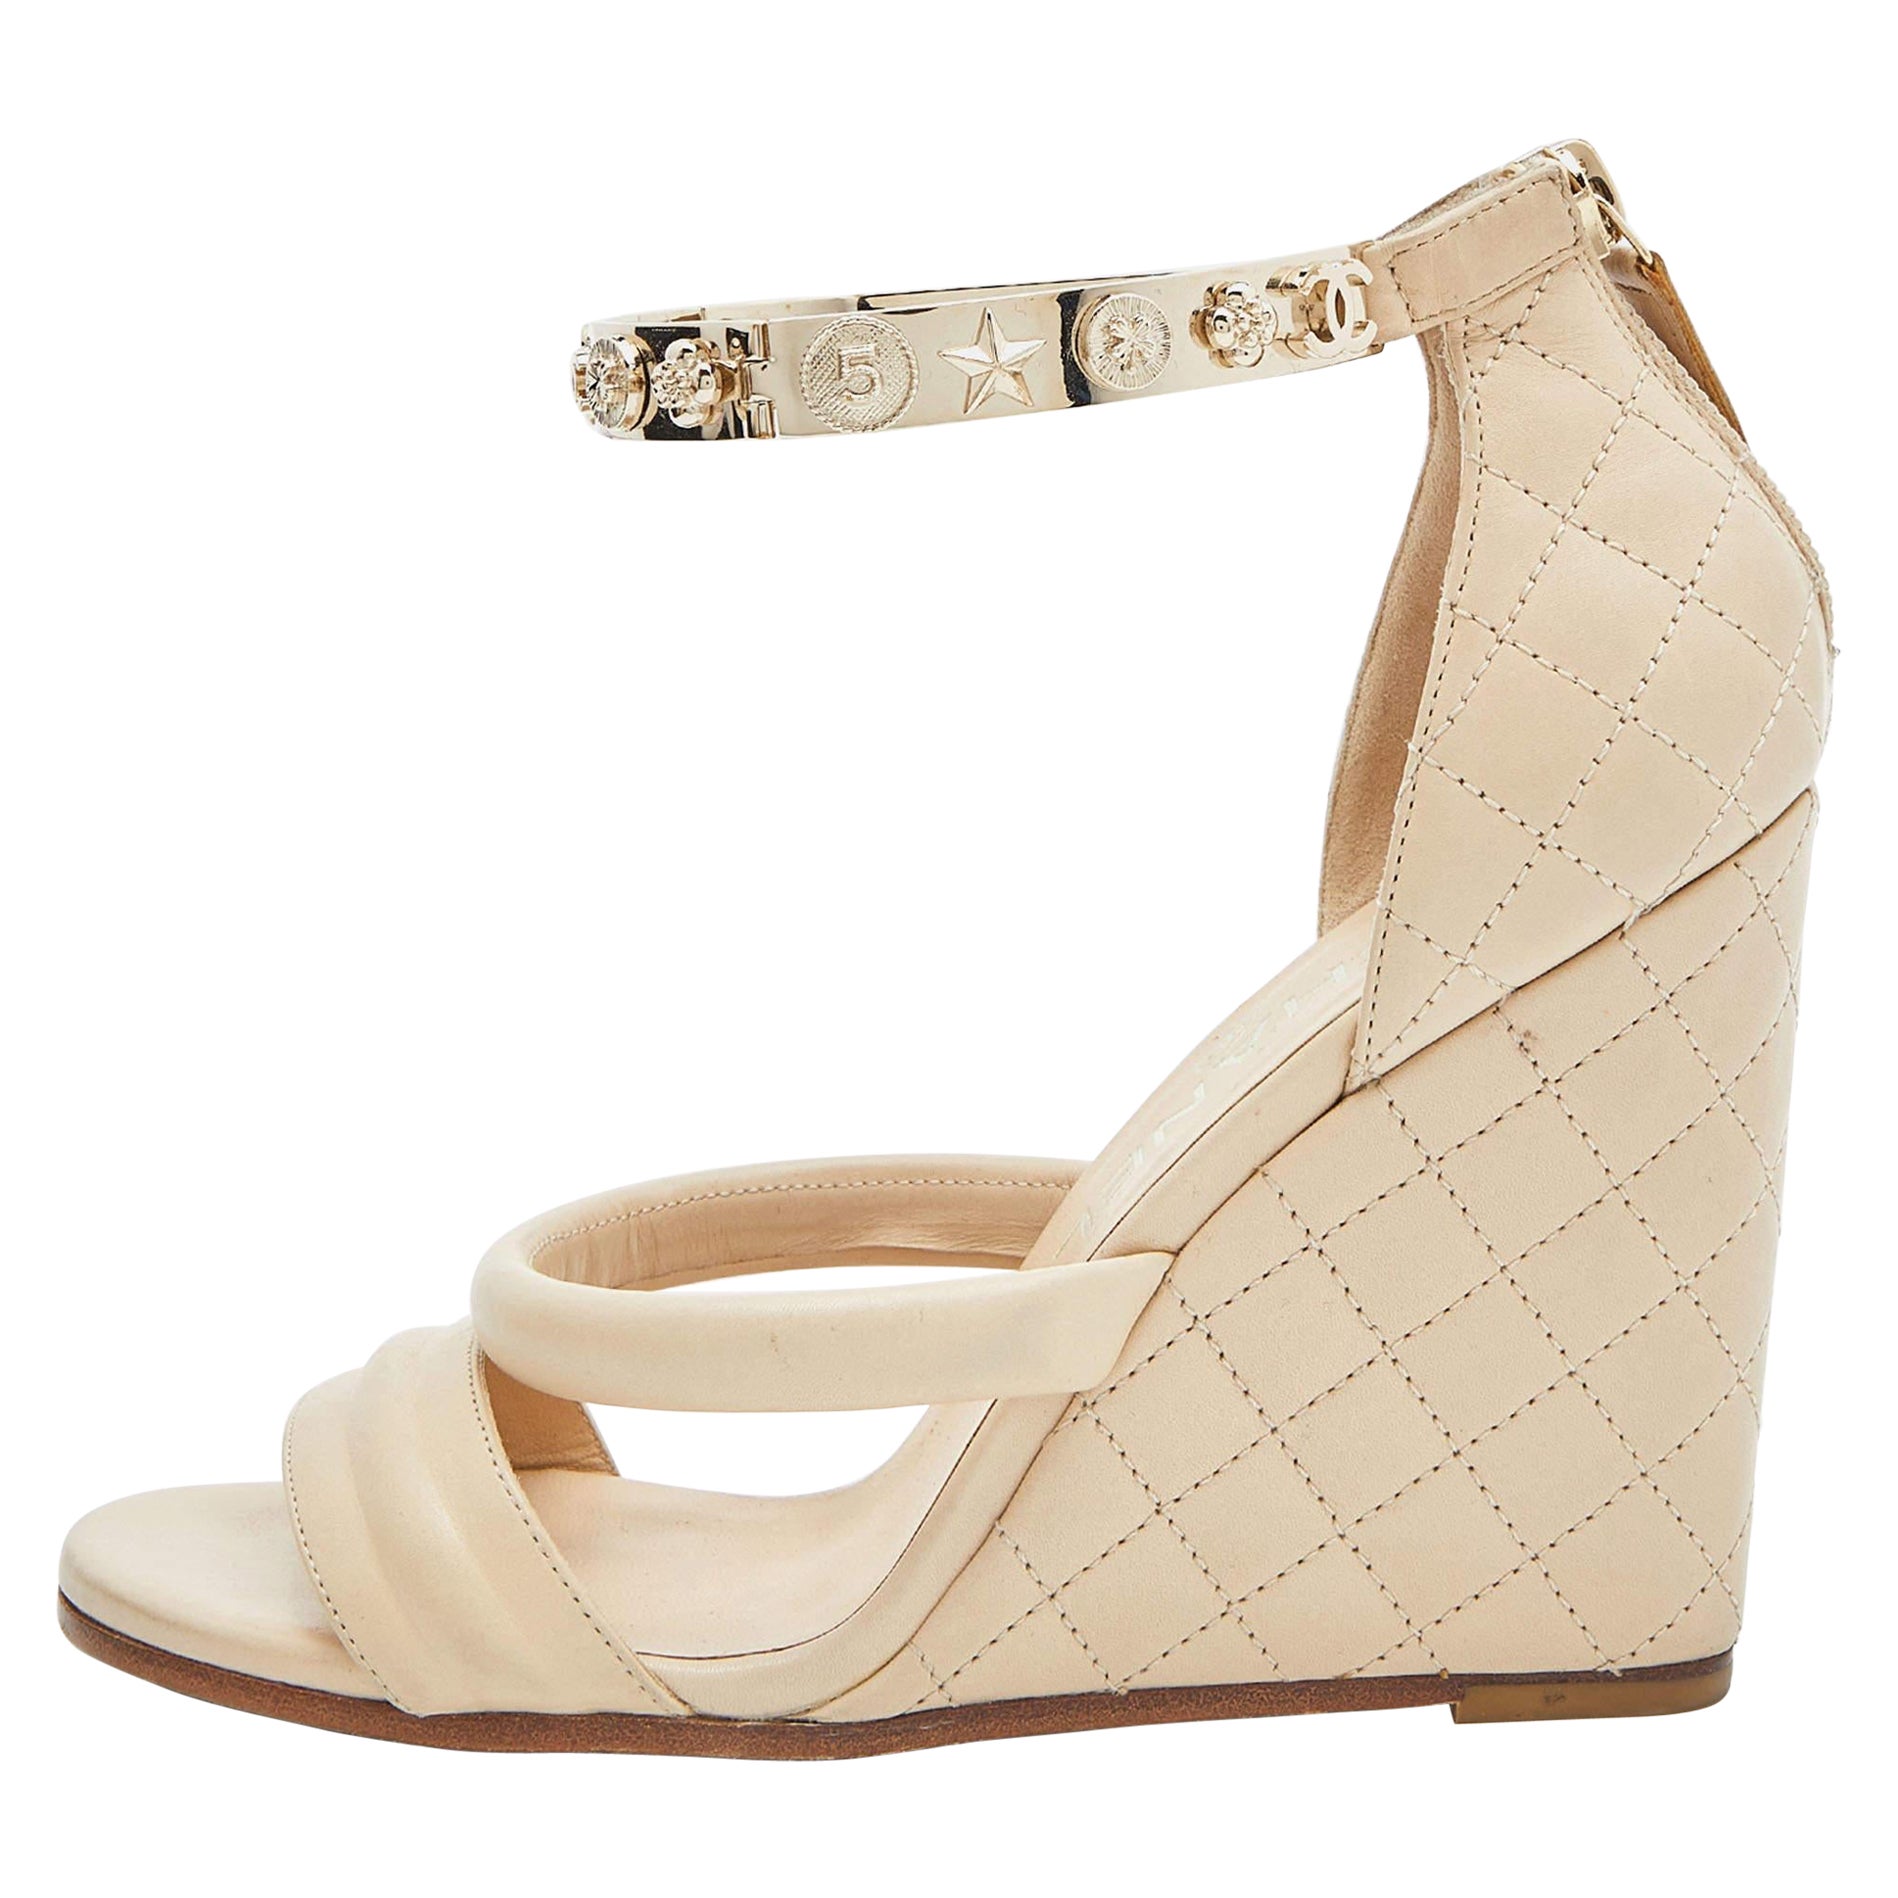 Chanel Beige Quilted Leather Bracelet Ankle Strap Wedge Sandals Size 36